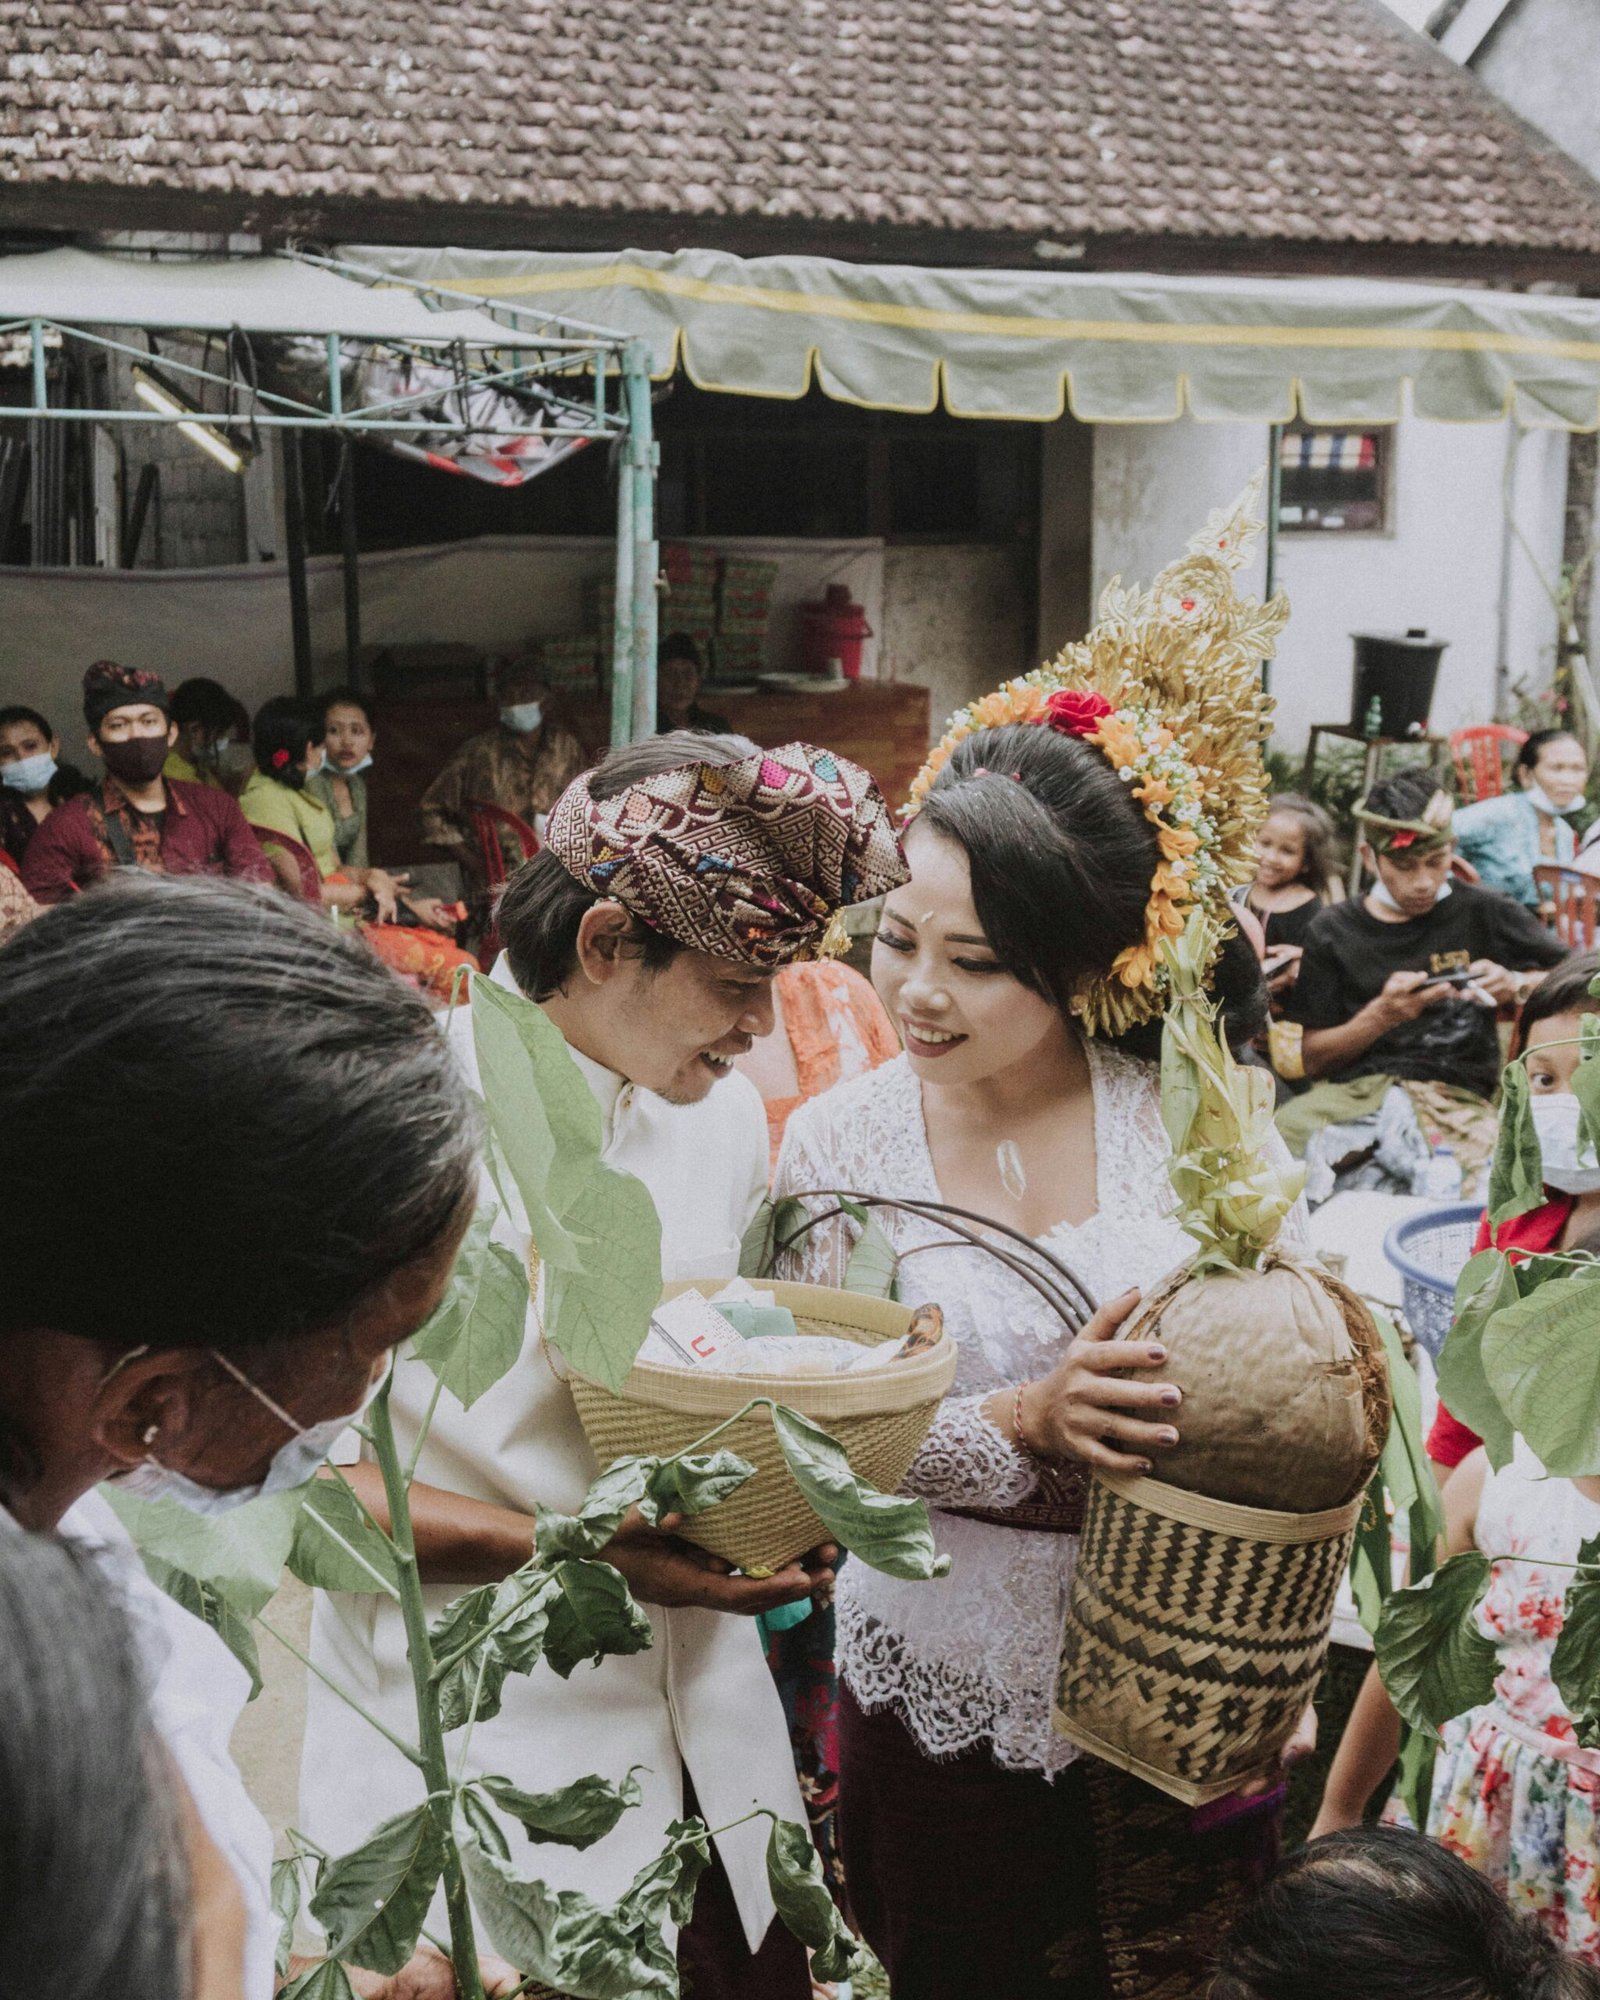 Getting Married with a Balinese Man